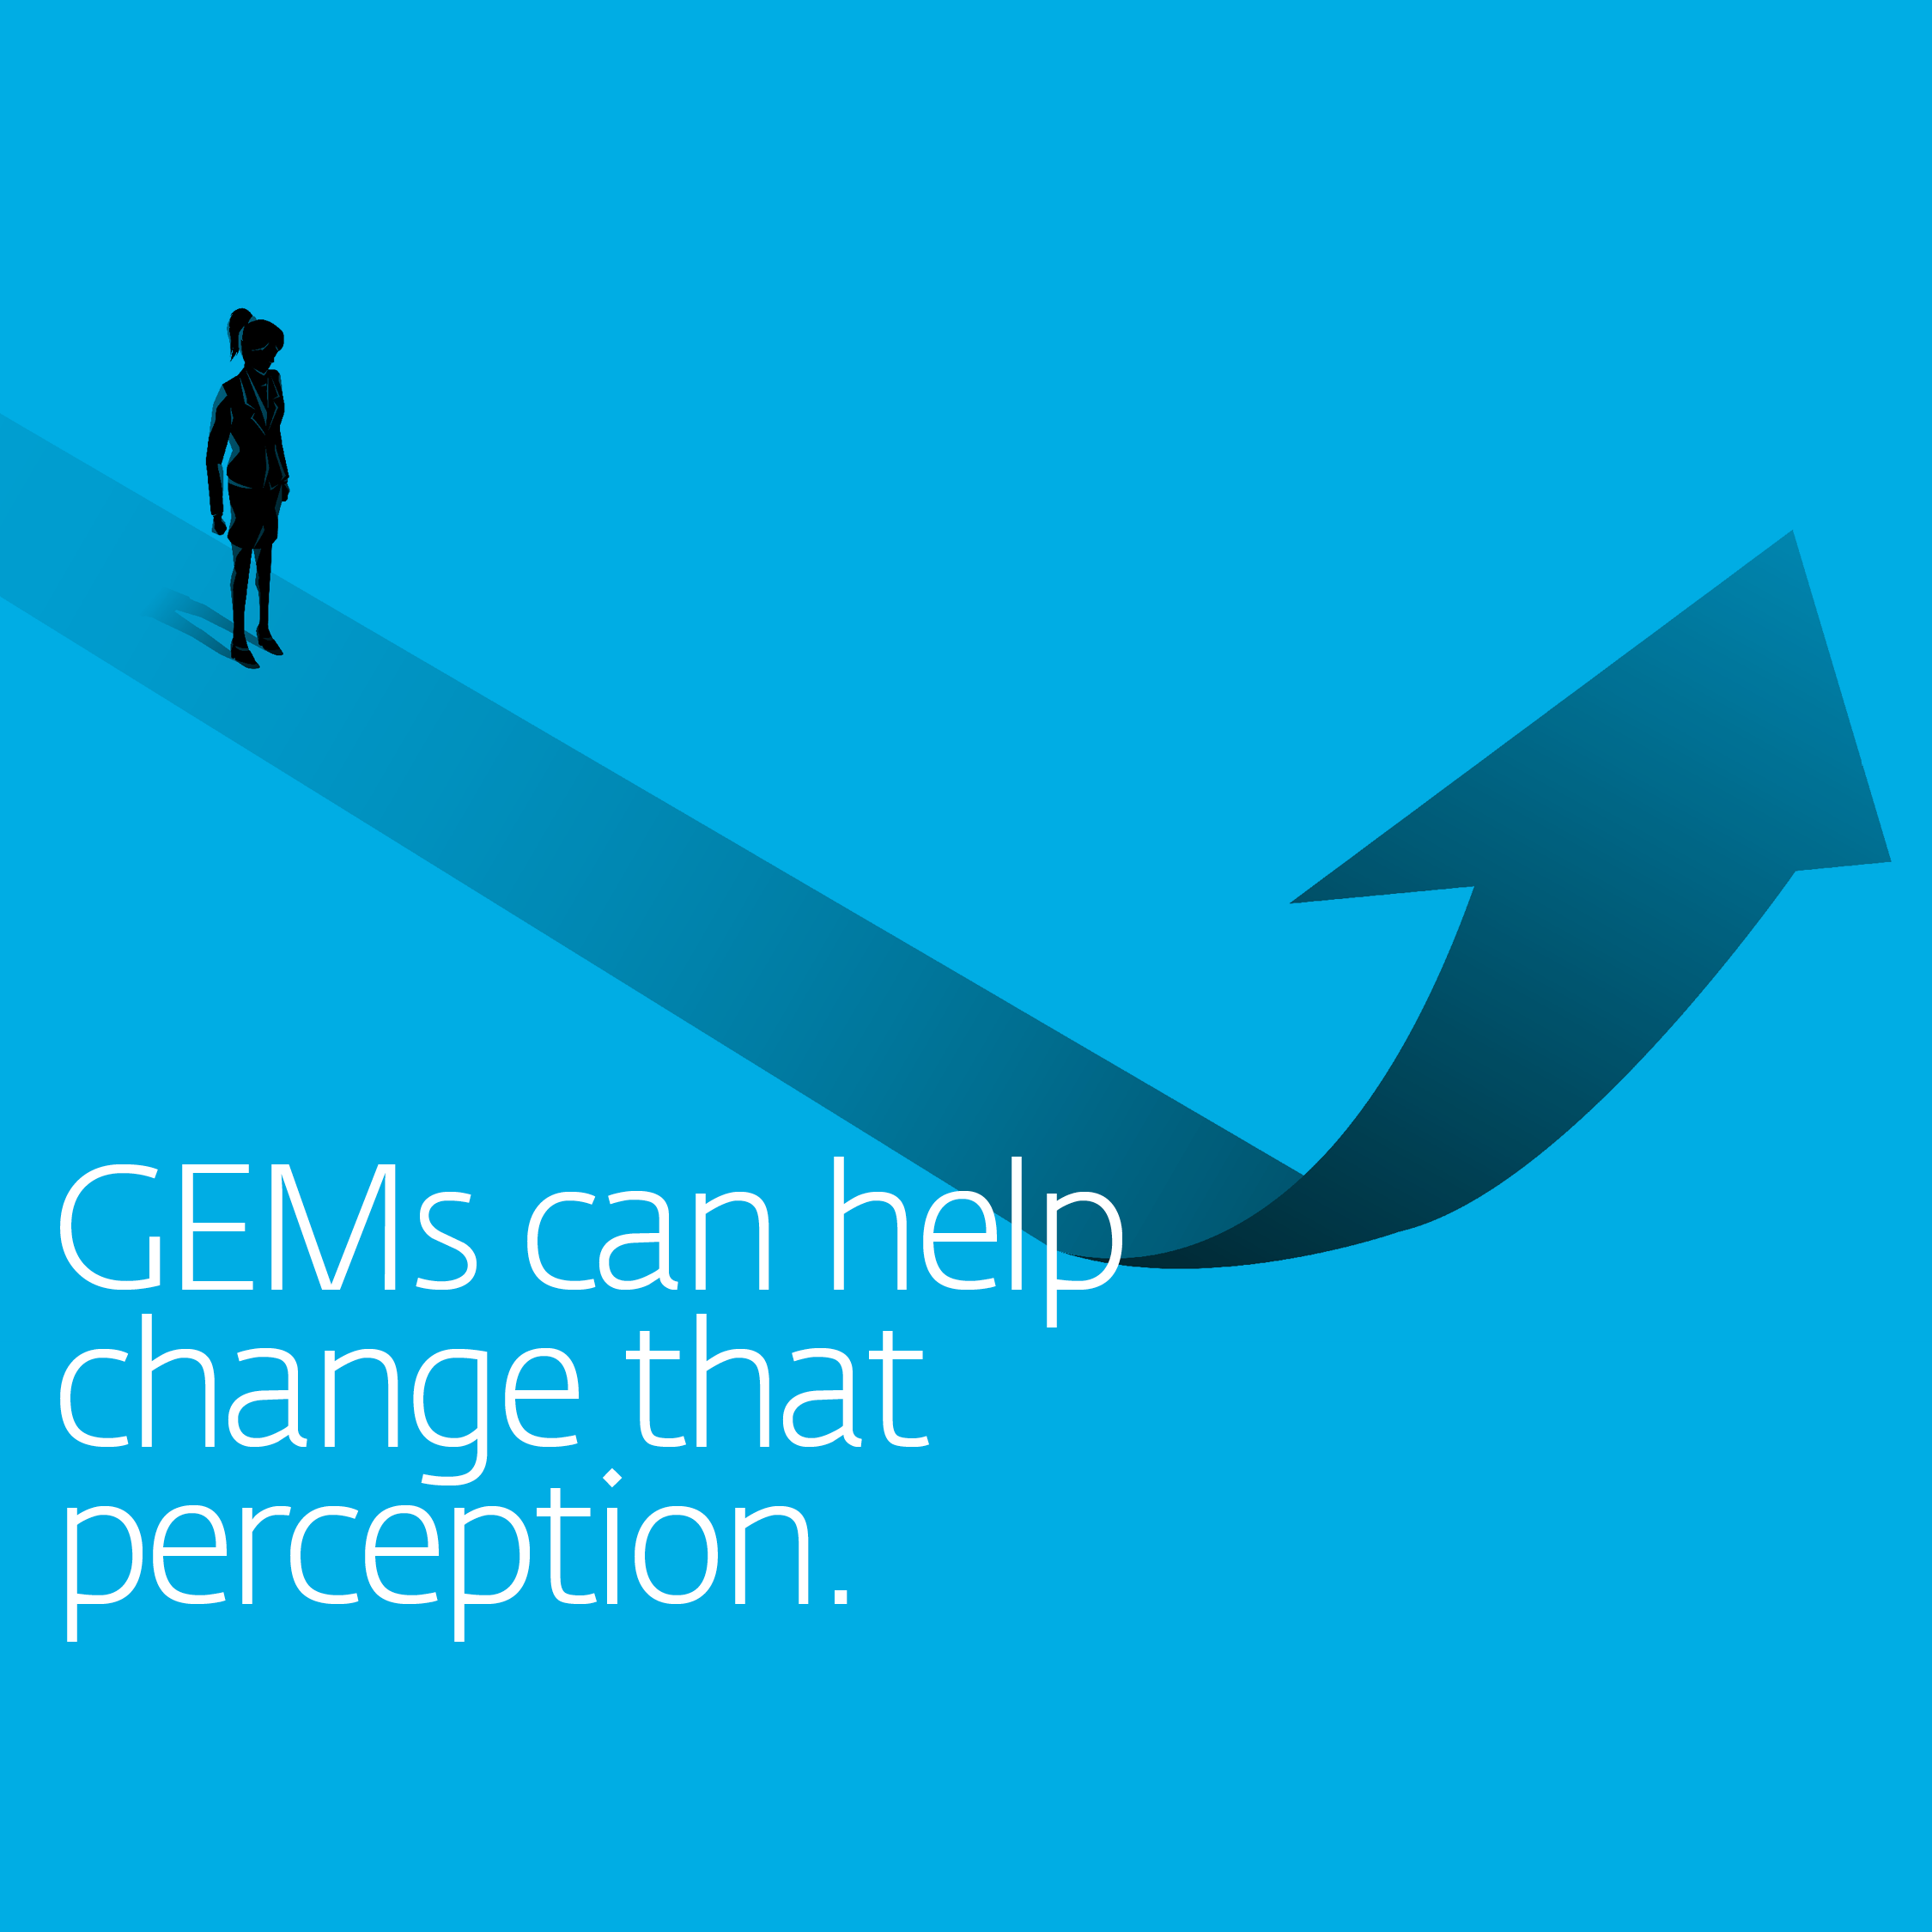 GEMs can help change the perception that emerging markets are risky for investments..